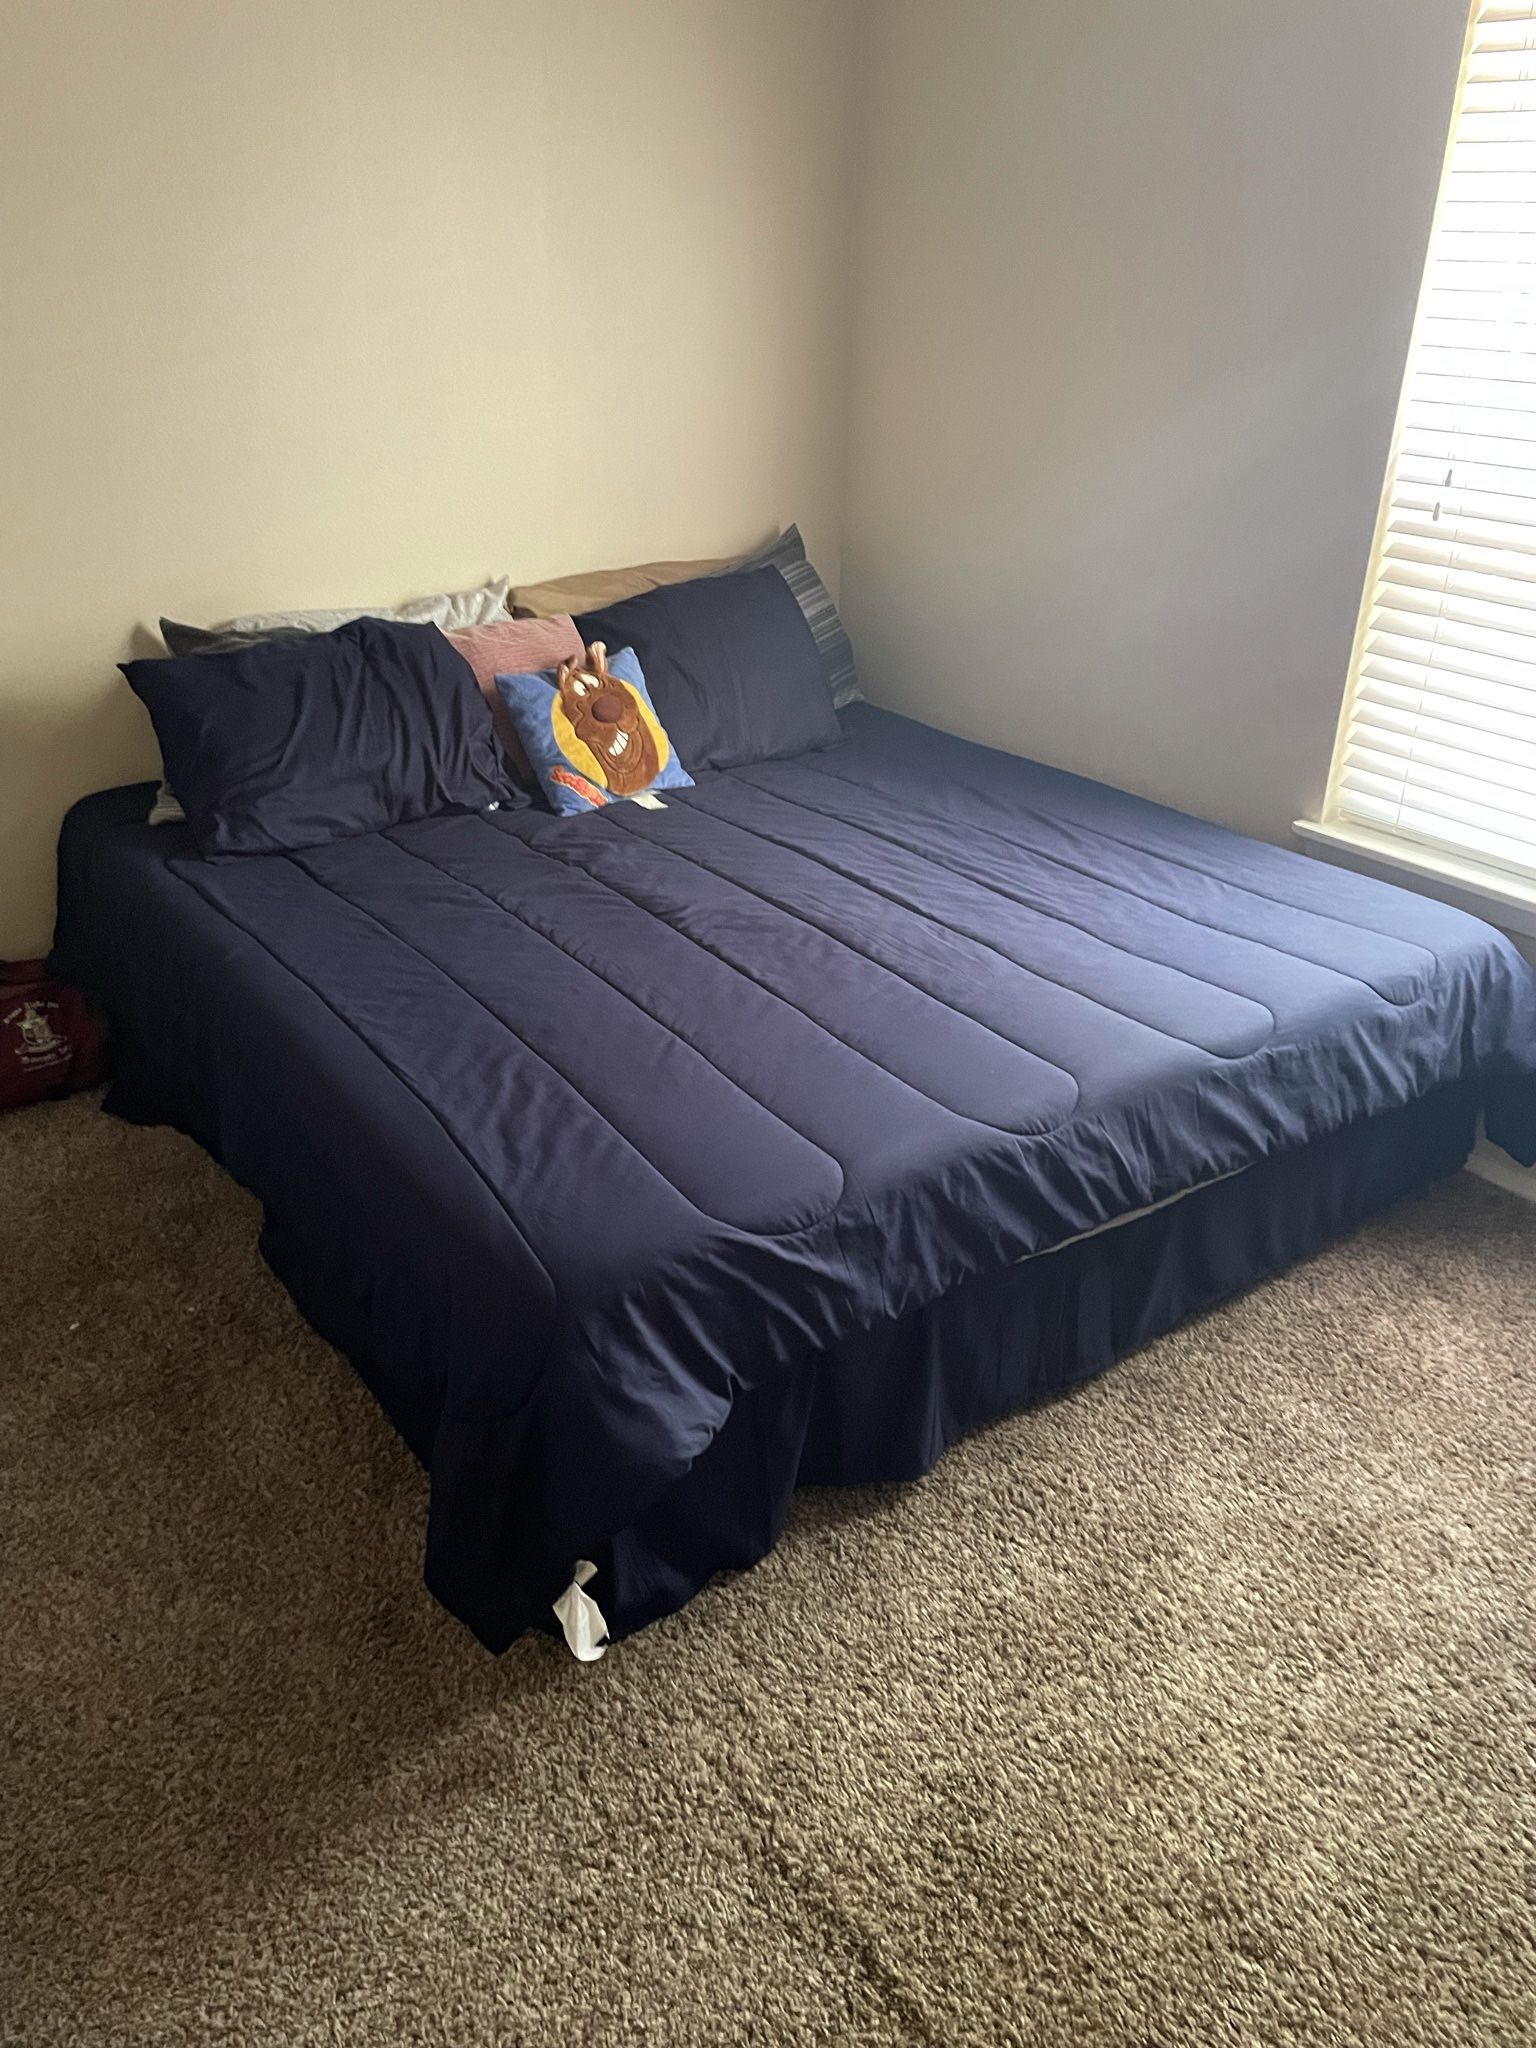 KING SIZE BED FOR SELL